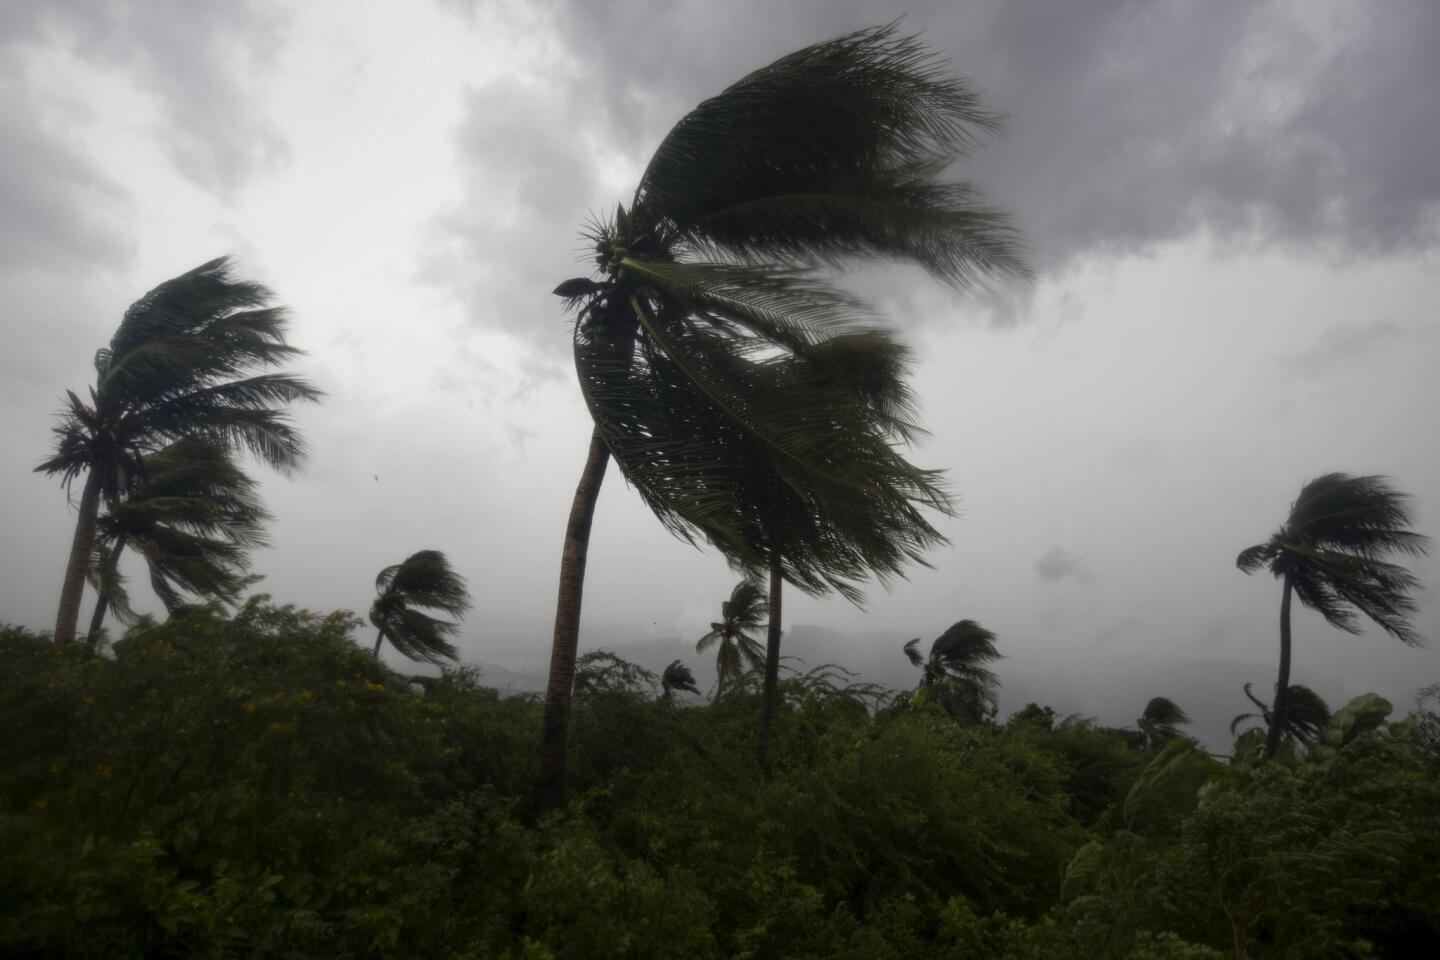 Wind blows coconut trees during the passage of Hurricane Matthew in Port-au-Prince, Haiti, on Oct. 4, 2016.